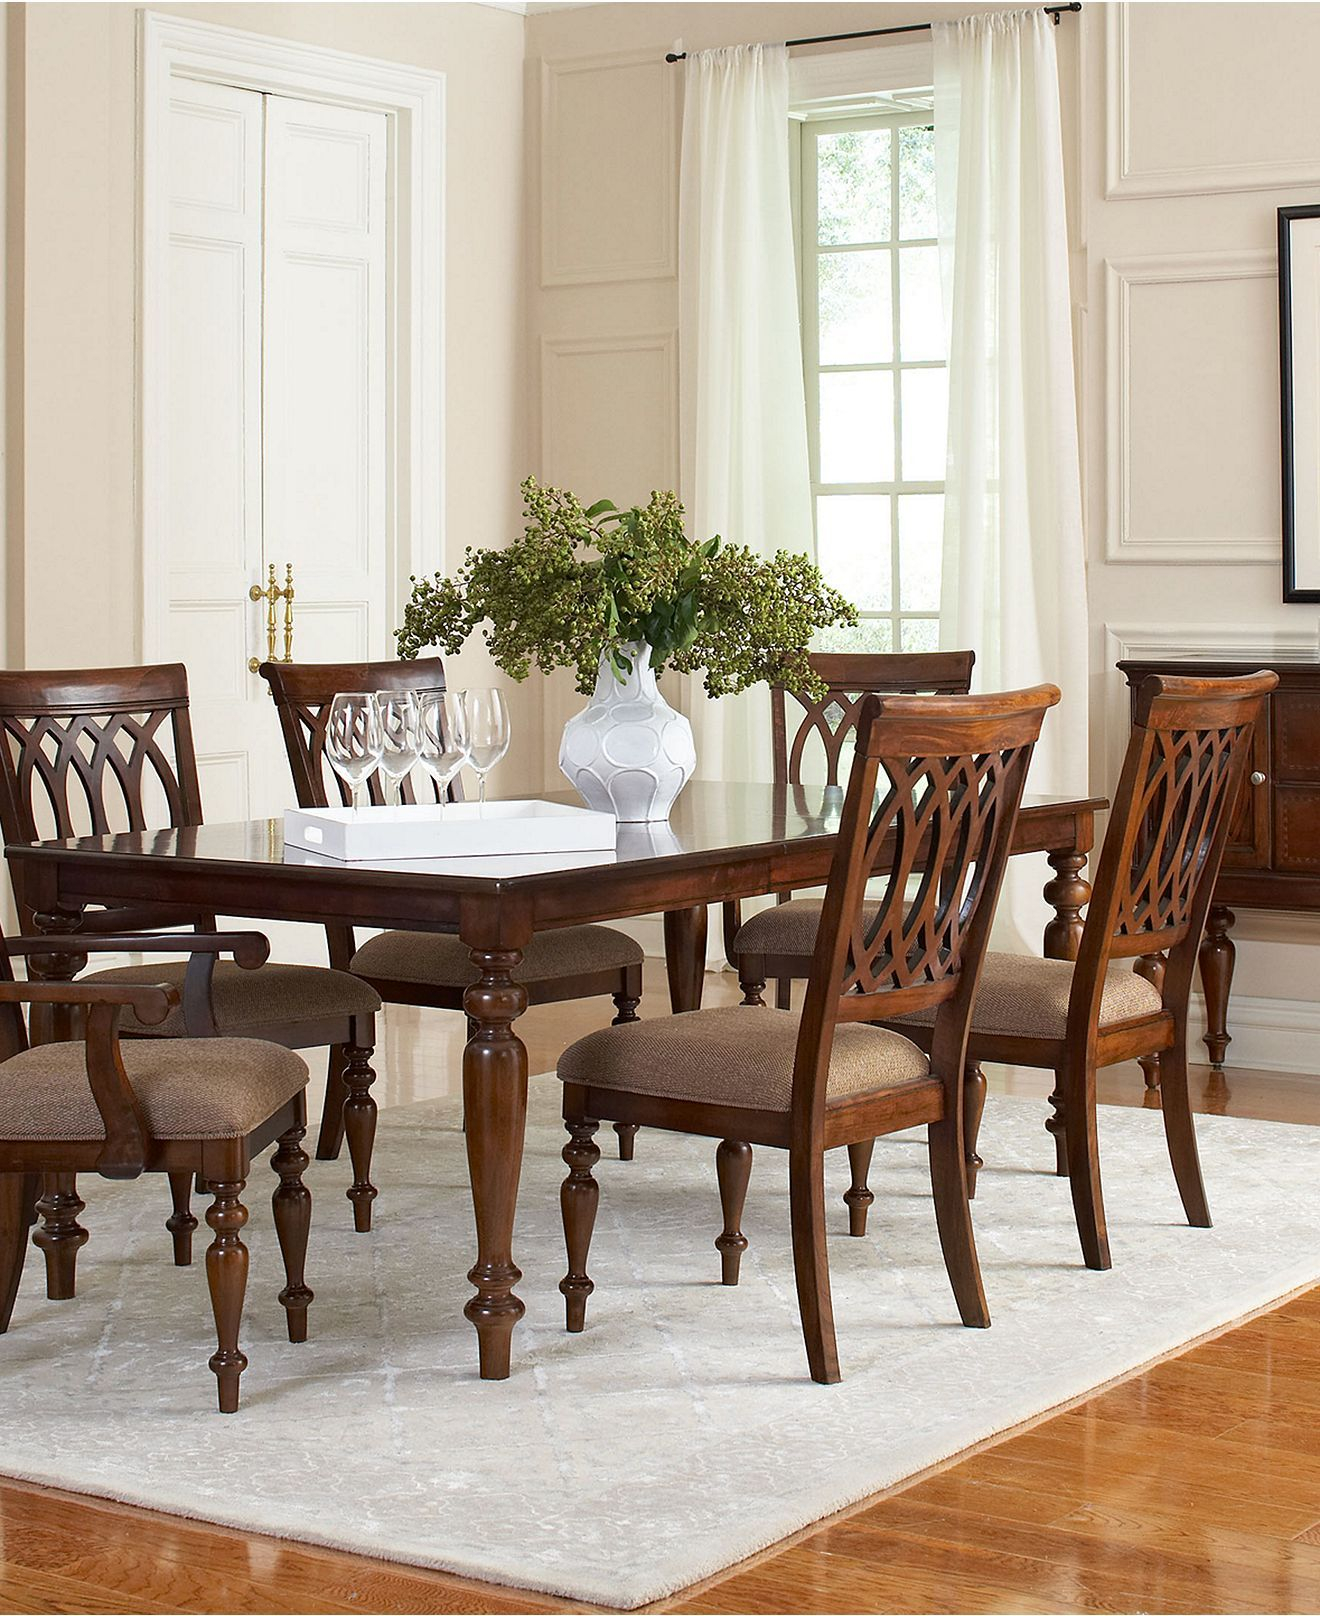 Crestwood Dining Room Furniture Collection Dining Room with regard to size 1320 X 1616